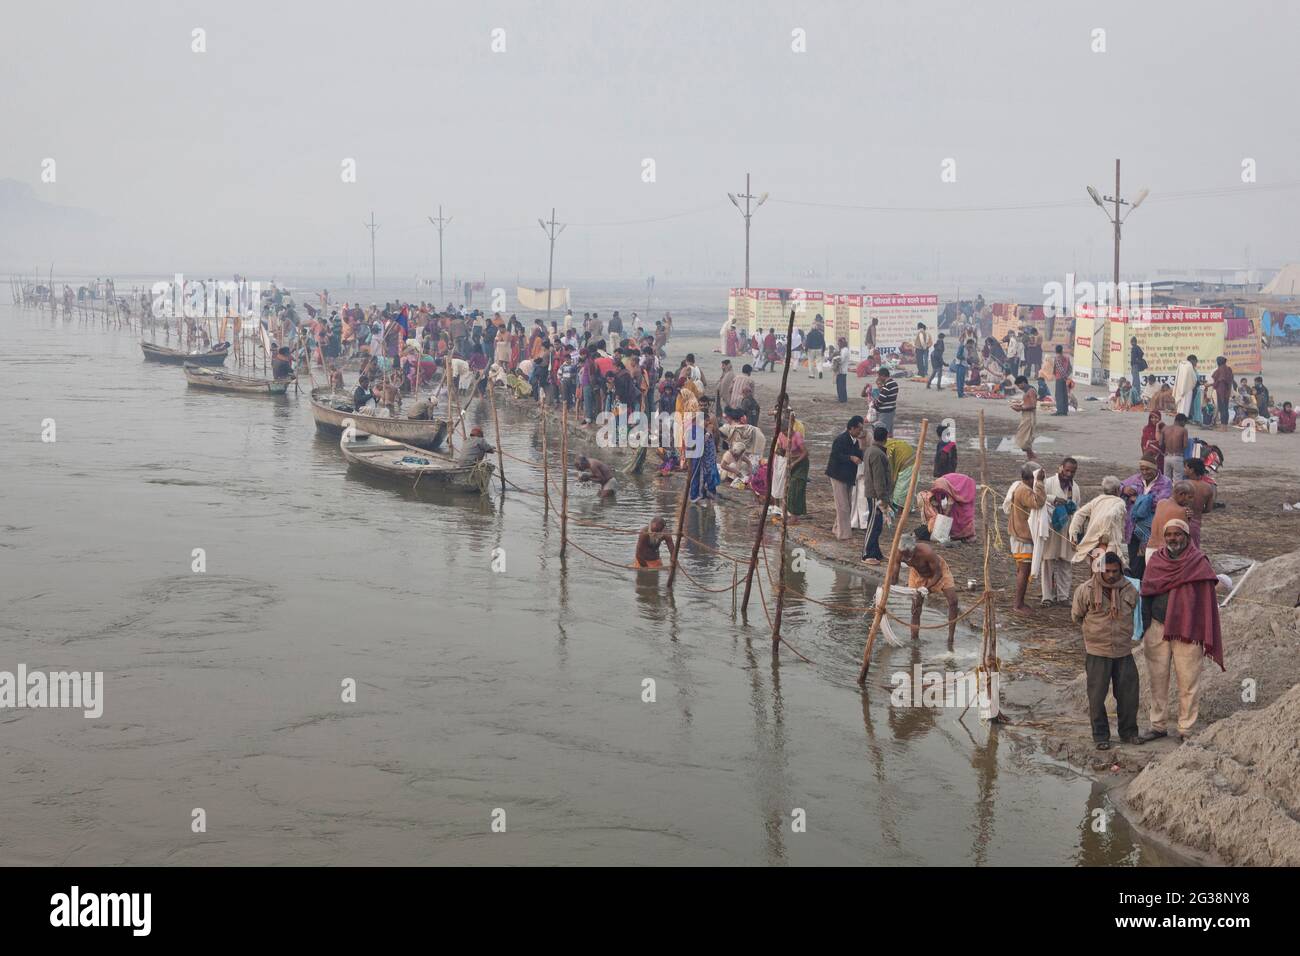 People bathing in the Ganges River at the Kumbh Mela in India Stock Photo